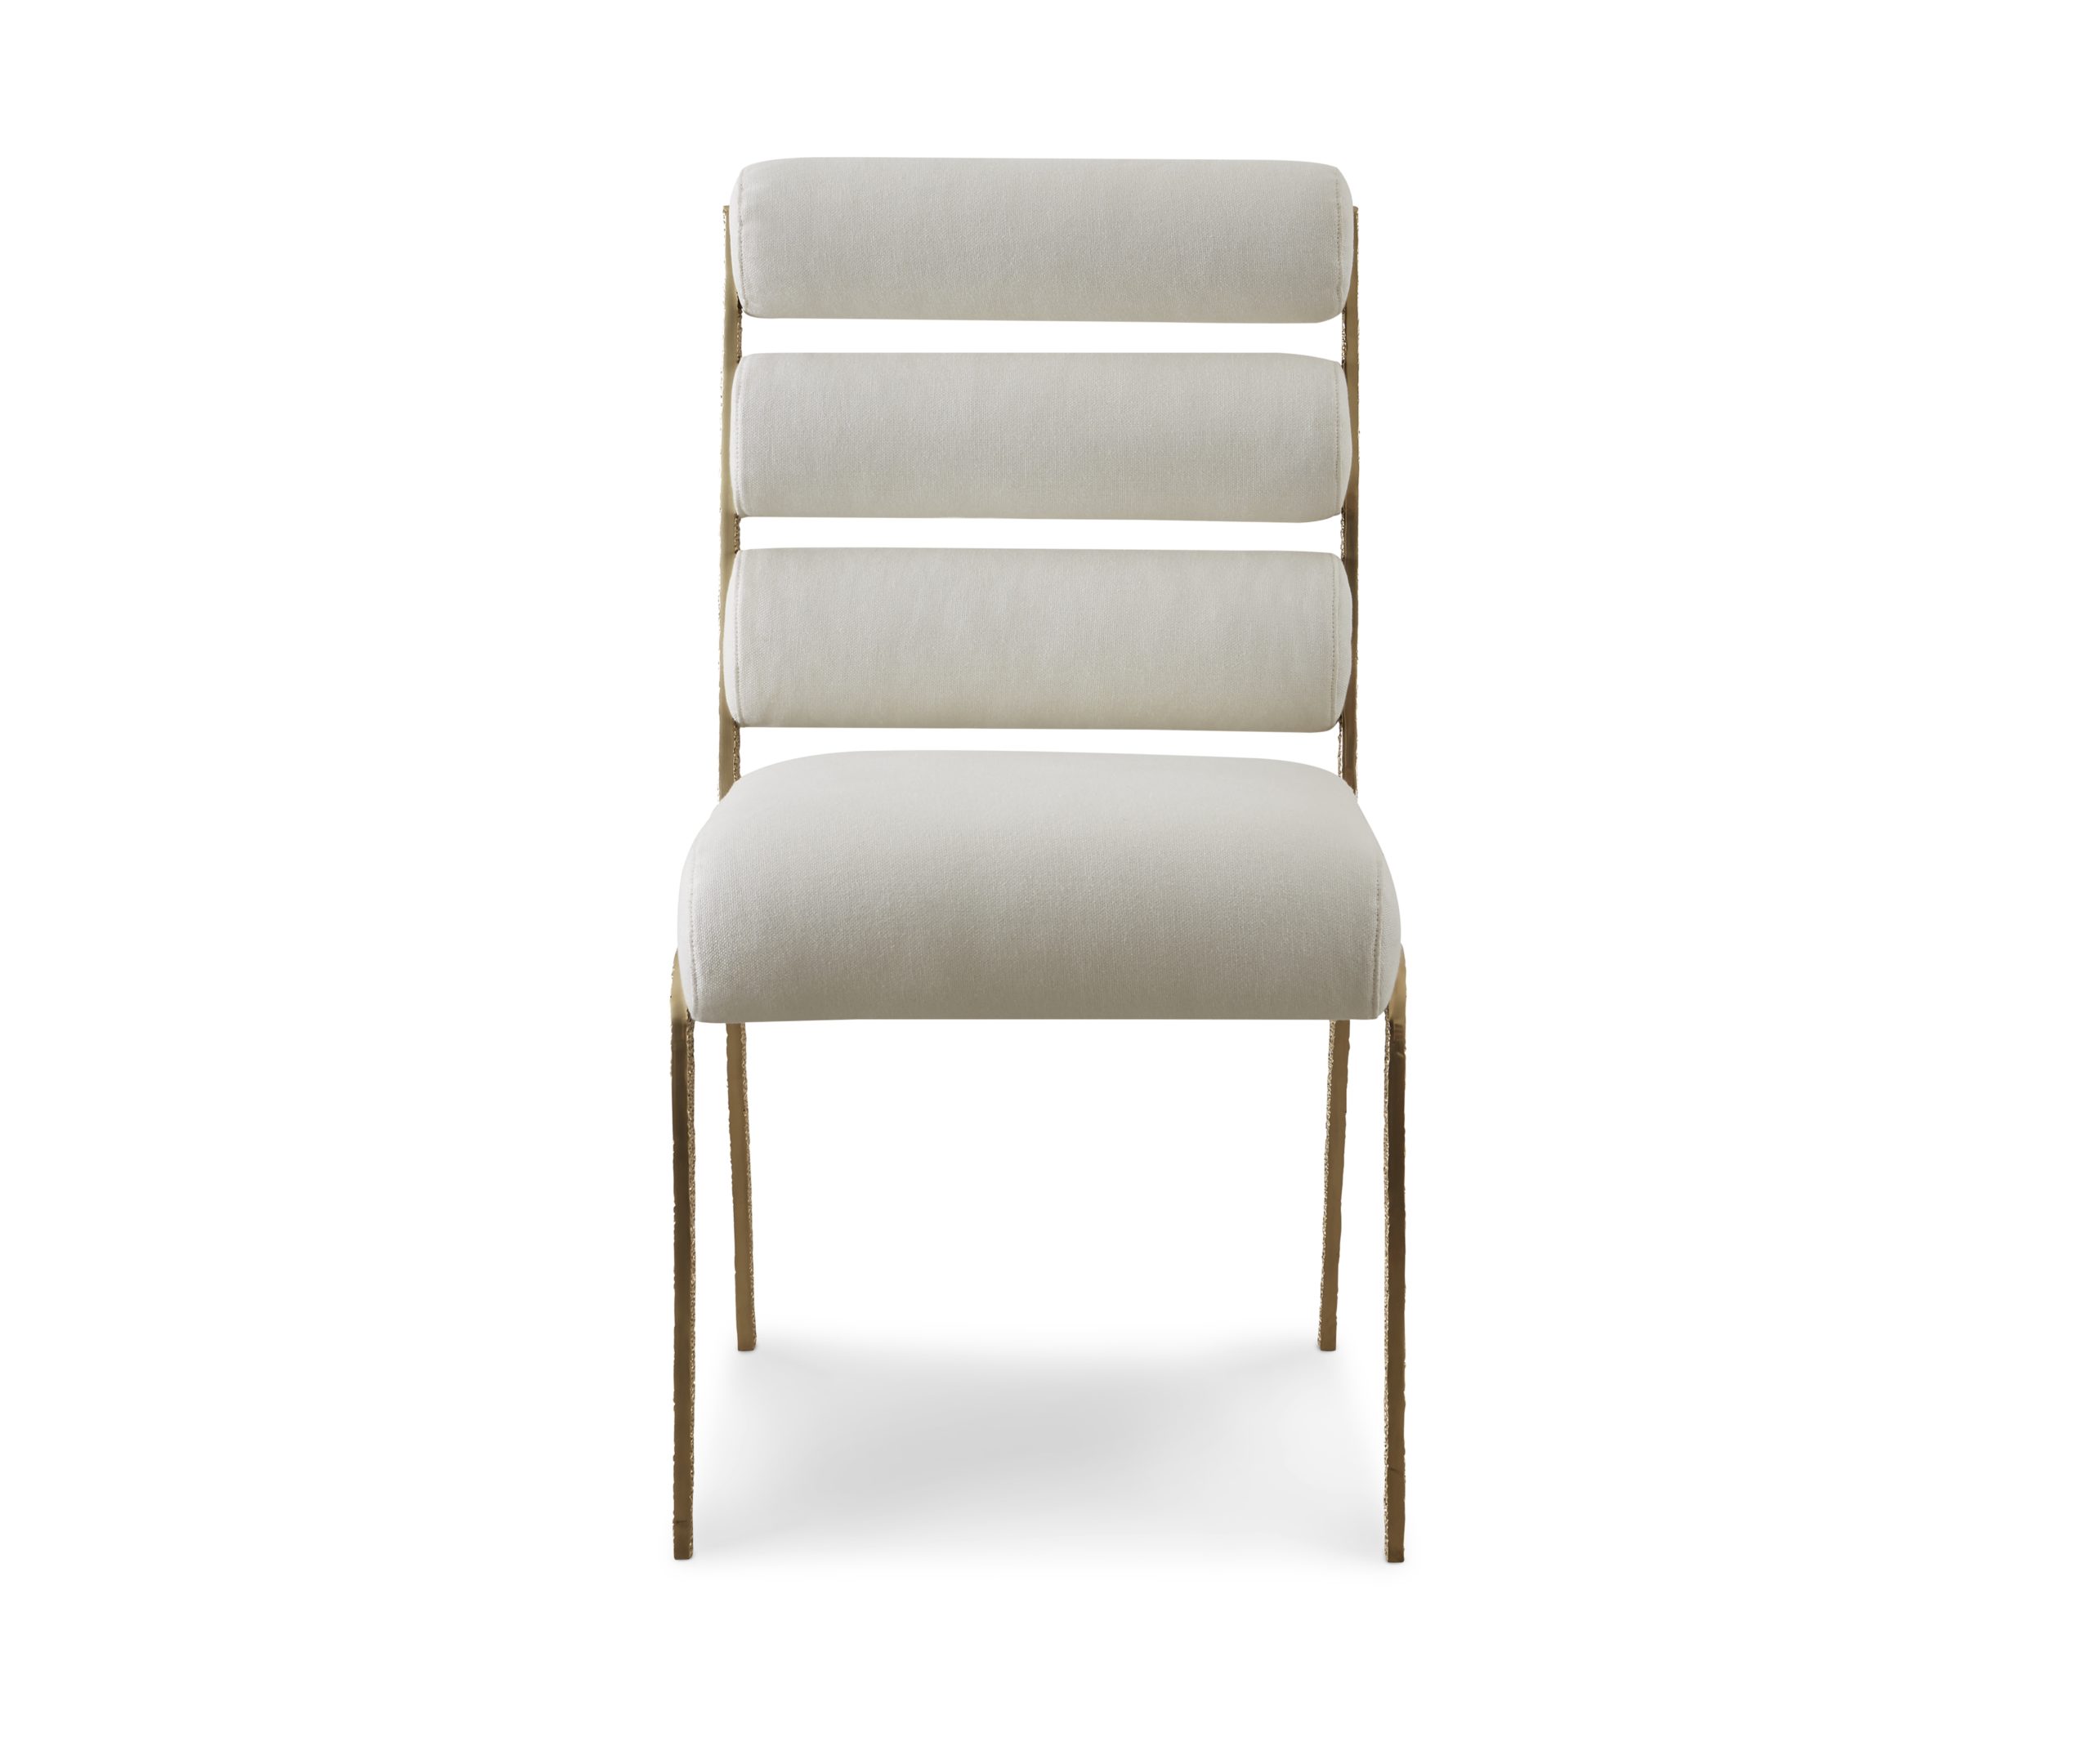 Baker_products_WNWN_lucca_chair_BAA3043_FRONT-scaled-2